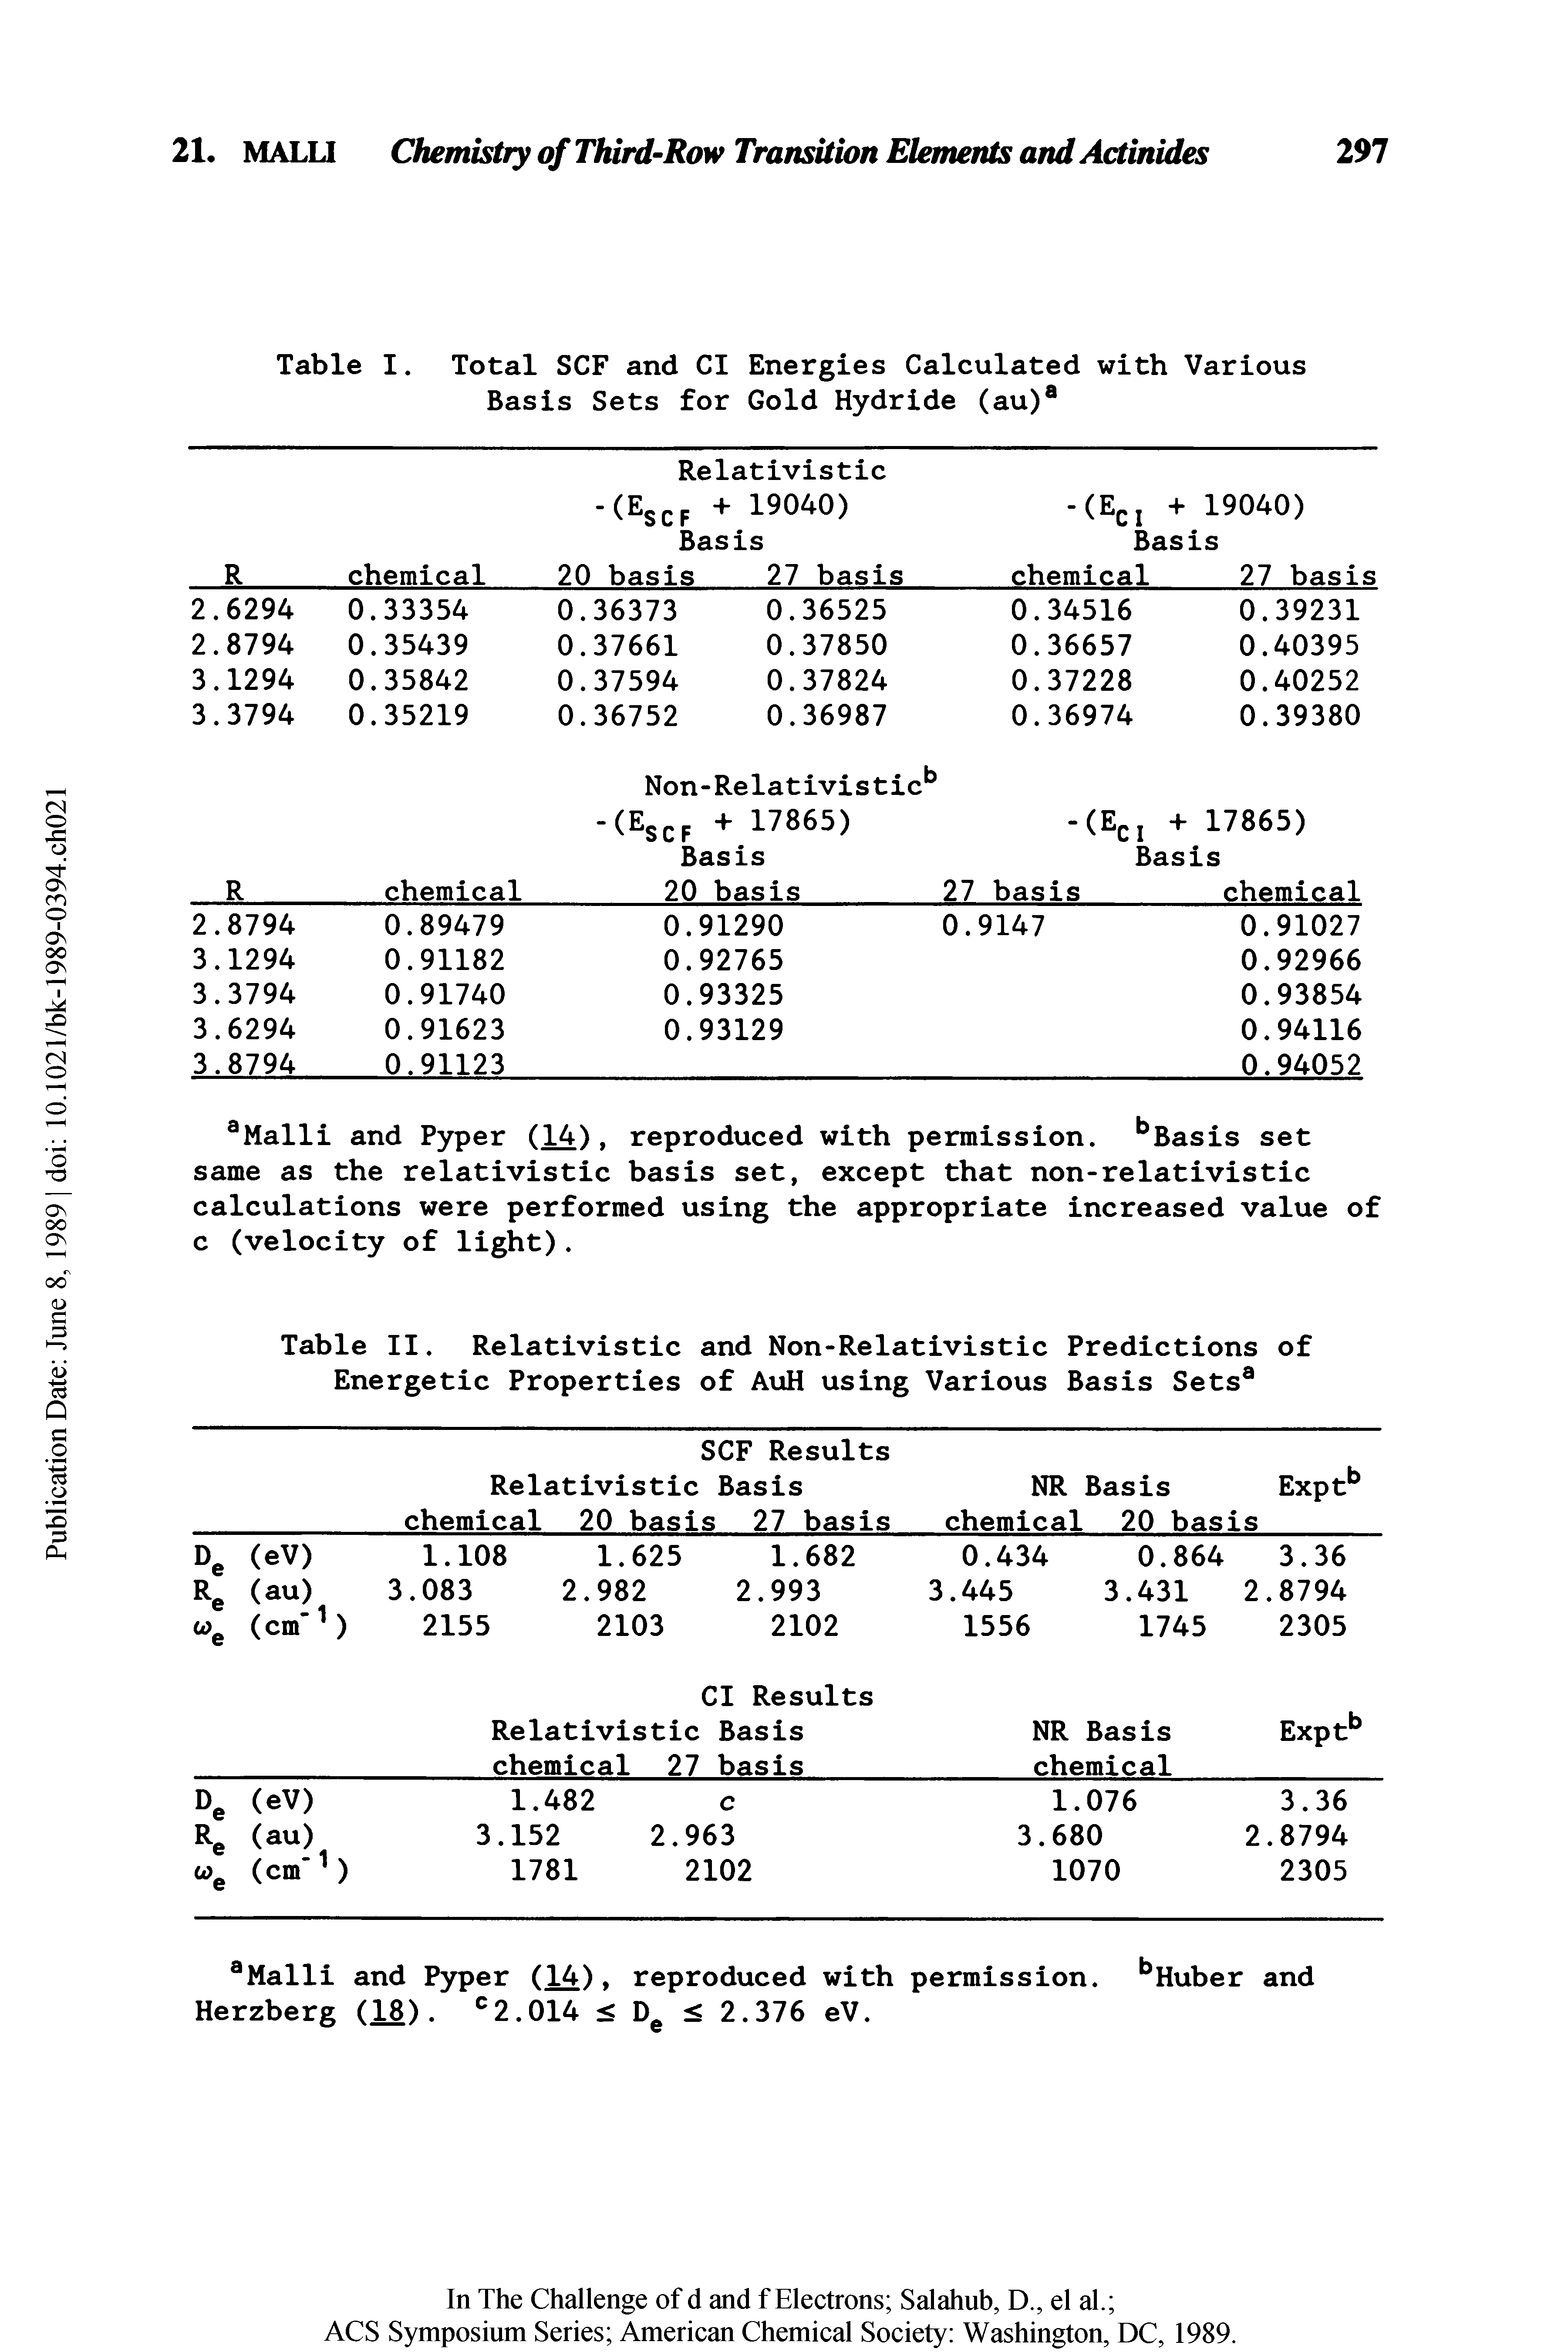 Table I. Total SCF and Cl Energies Calculated with Various Basis Sets for Gold Hydride (au) ...